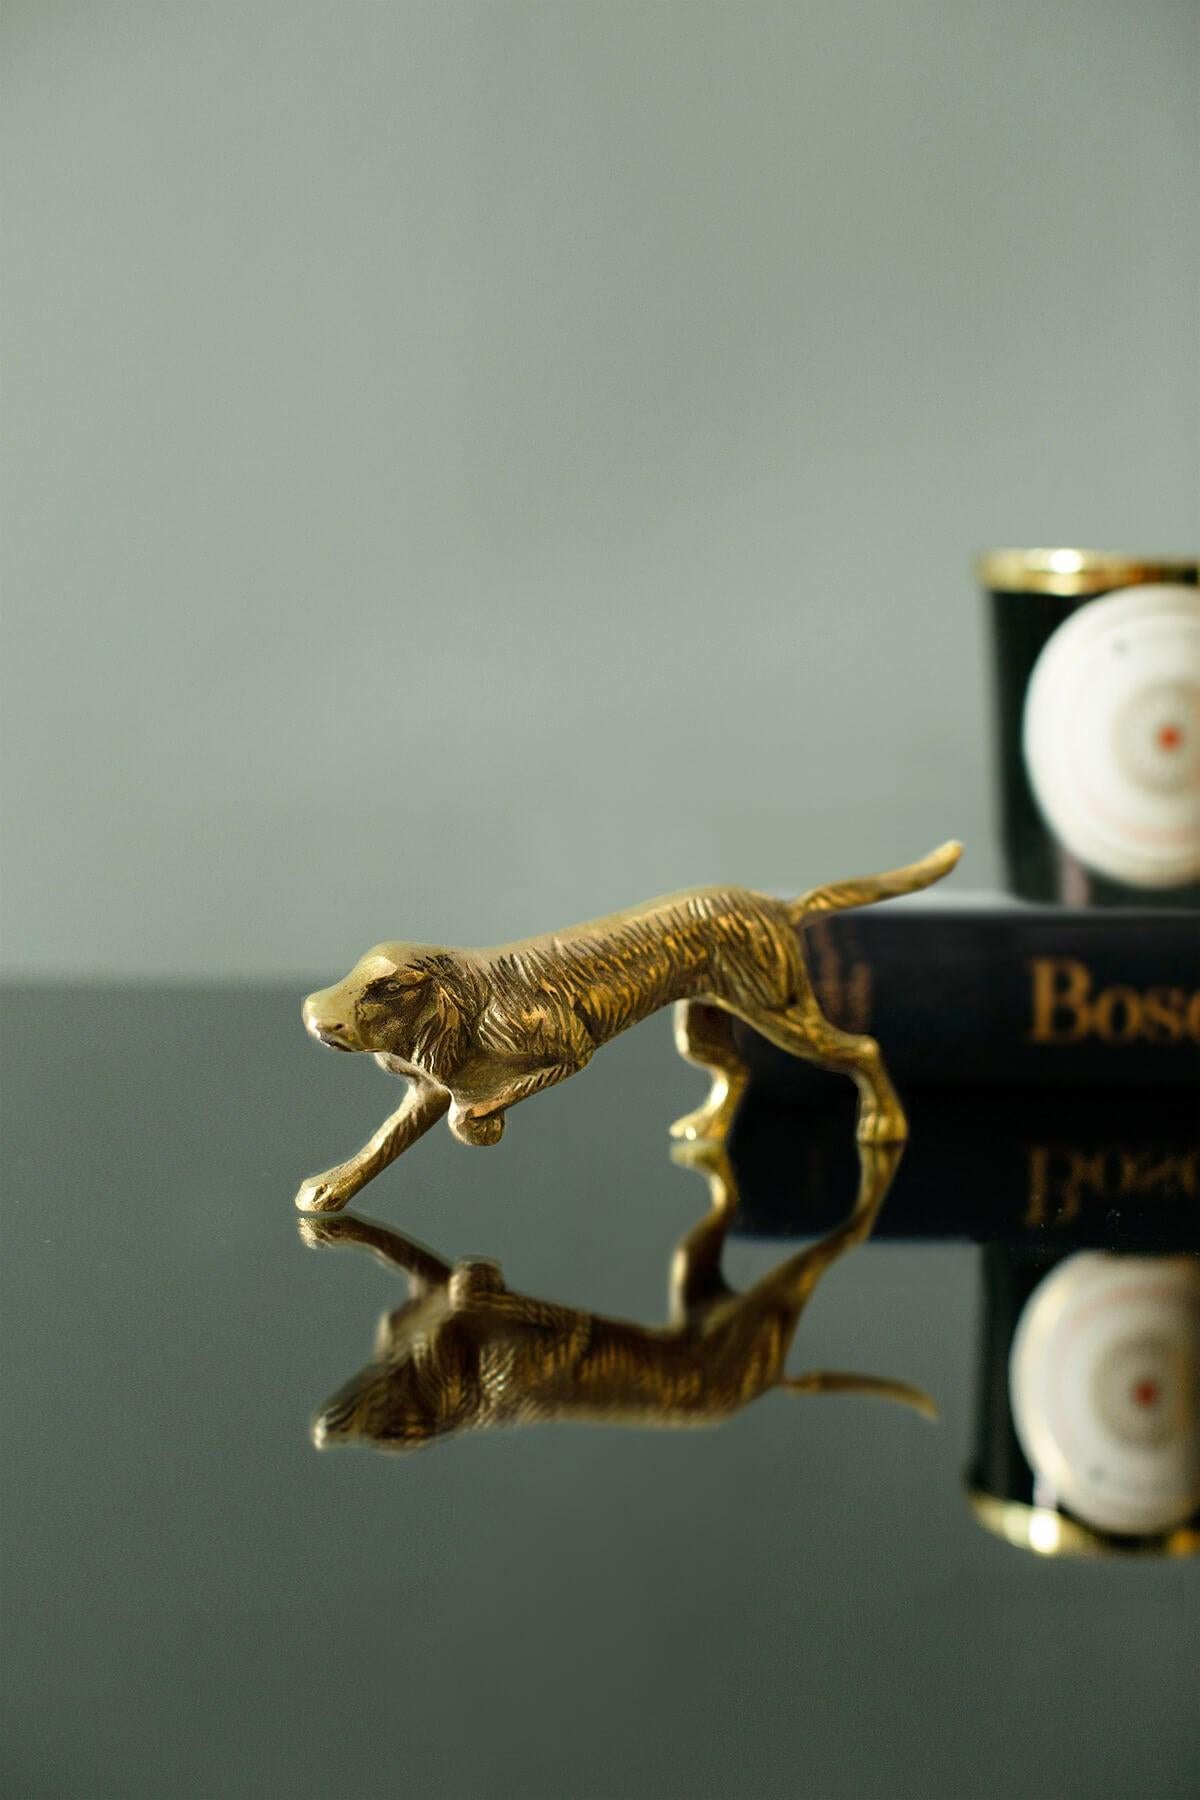 -Brass decorative object in a dog form.
-It would be a very nice, small collectable object for your interiors.

BRASS USE AND CARE
Clean surfaces with a dry cloth.
Minimize humidity and conditions that attract humidity.
Ensure surfaces are dry after